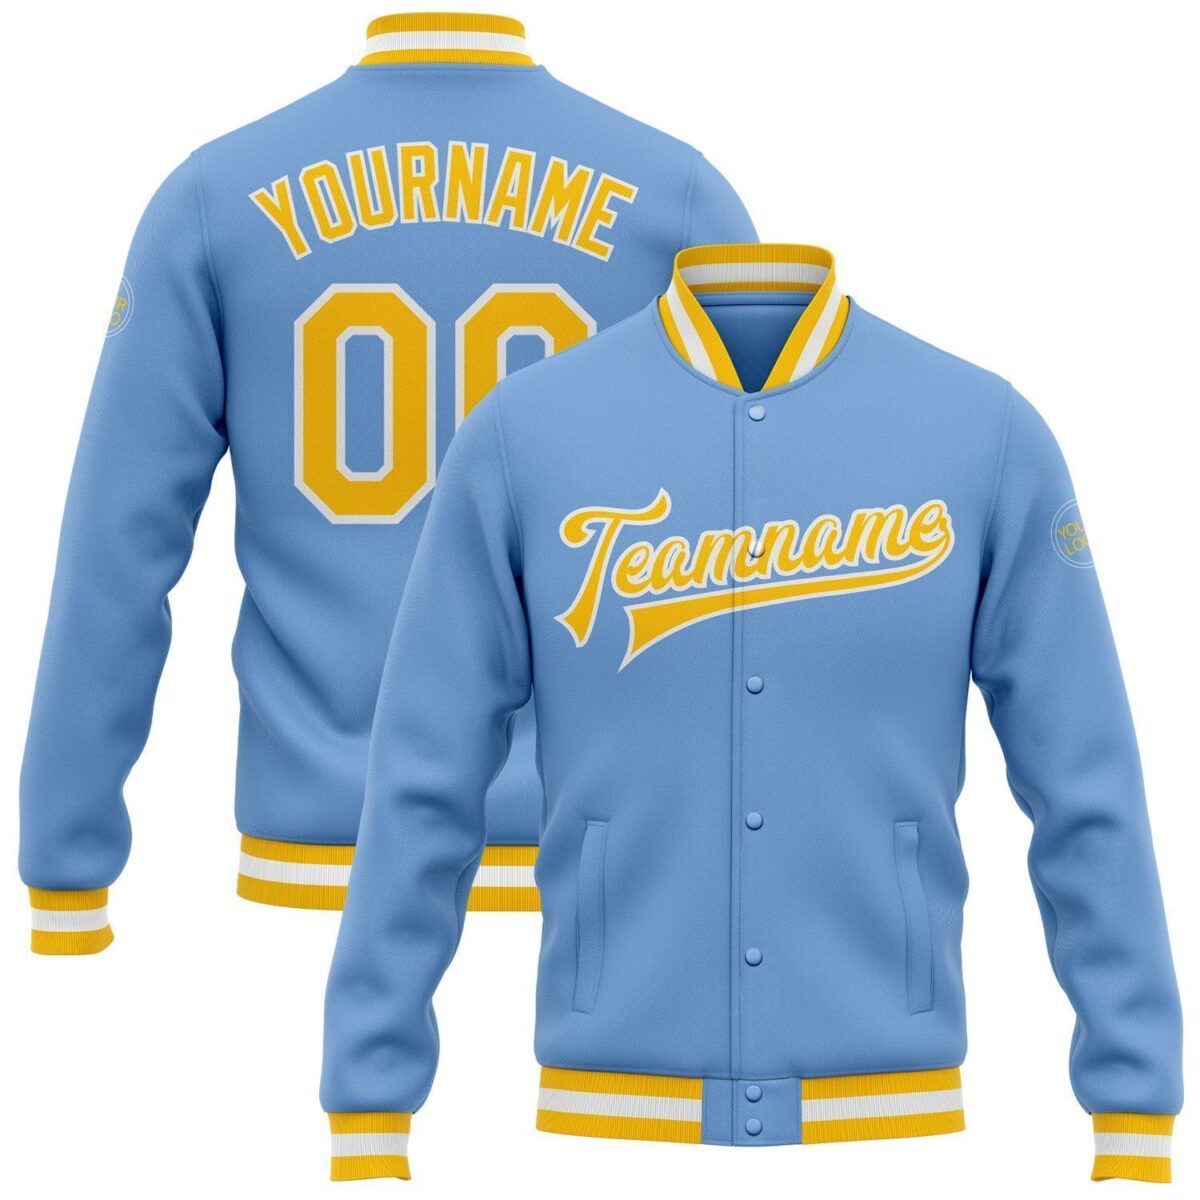 Student College Baseball Jackets with Sky & Yellow 1